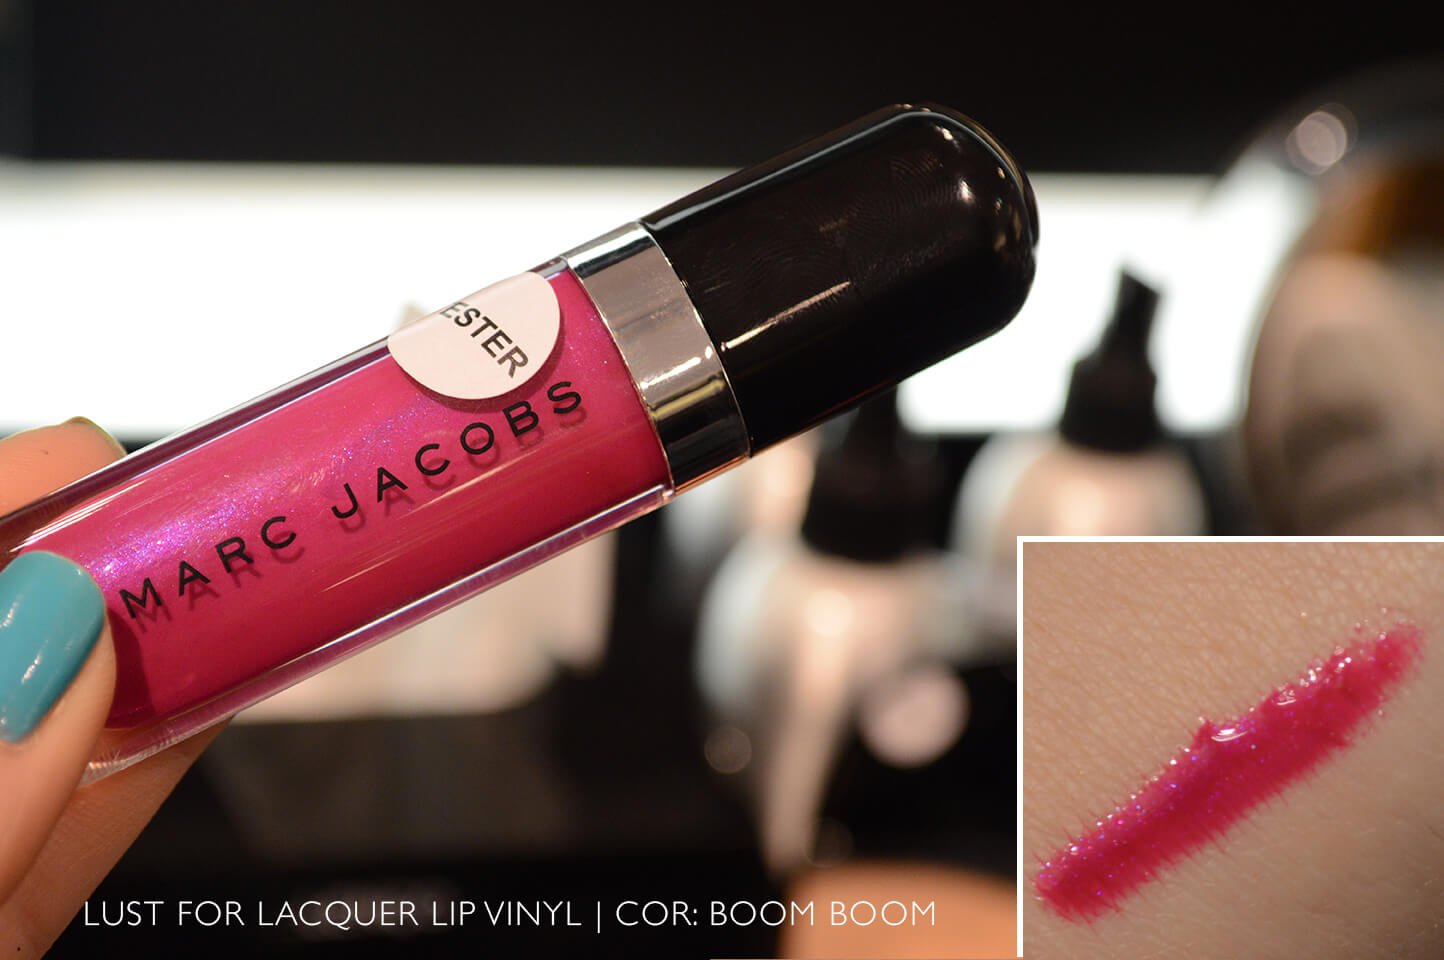 Gloss Lust for Lacquer Lip Vinyl na cor Boom Boom | Marc Jacobs Beauty